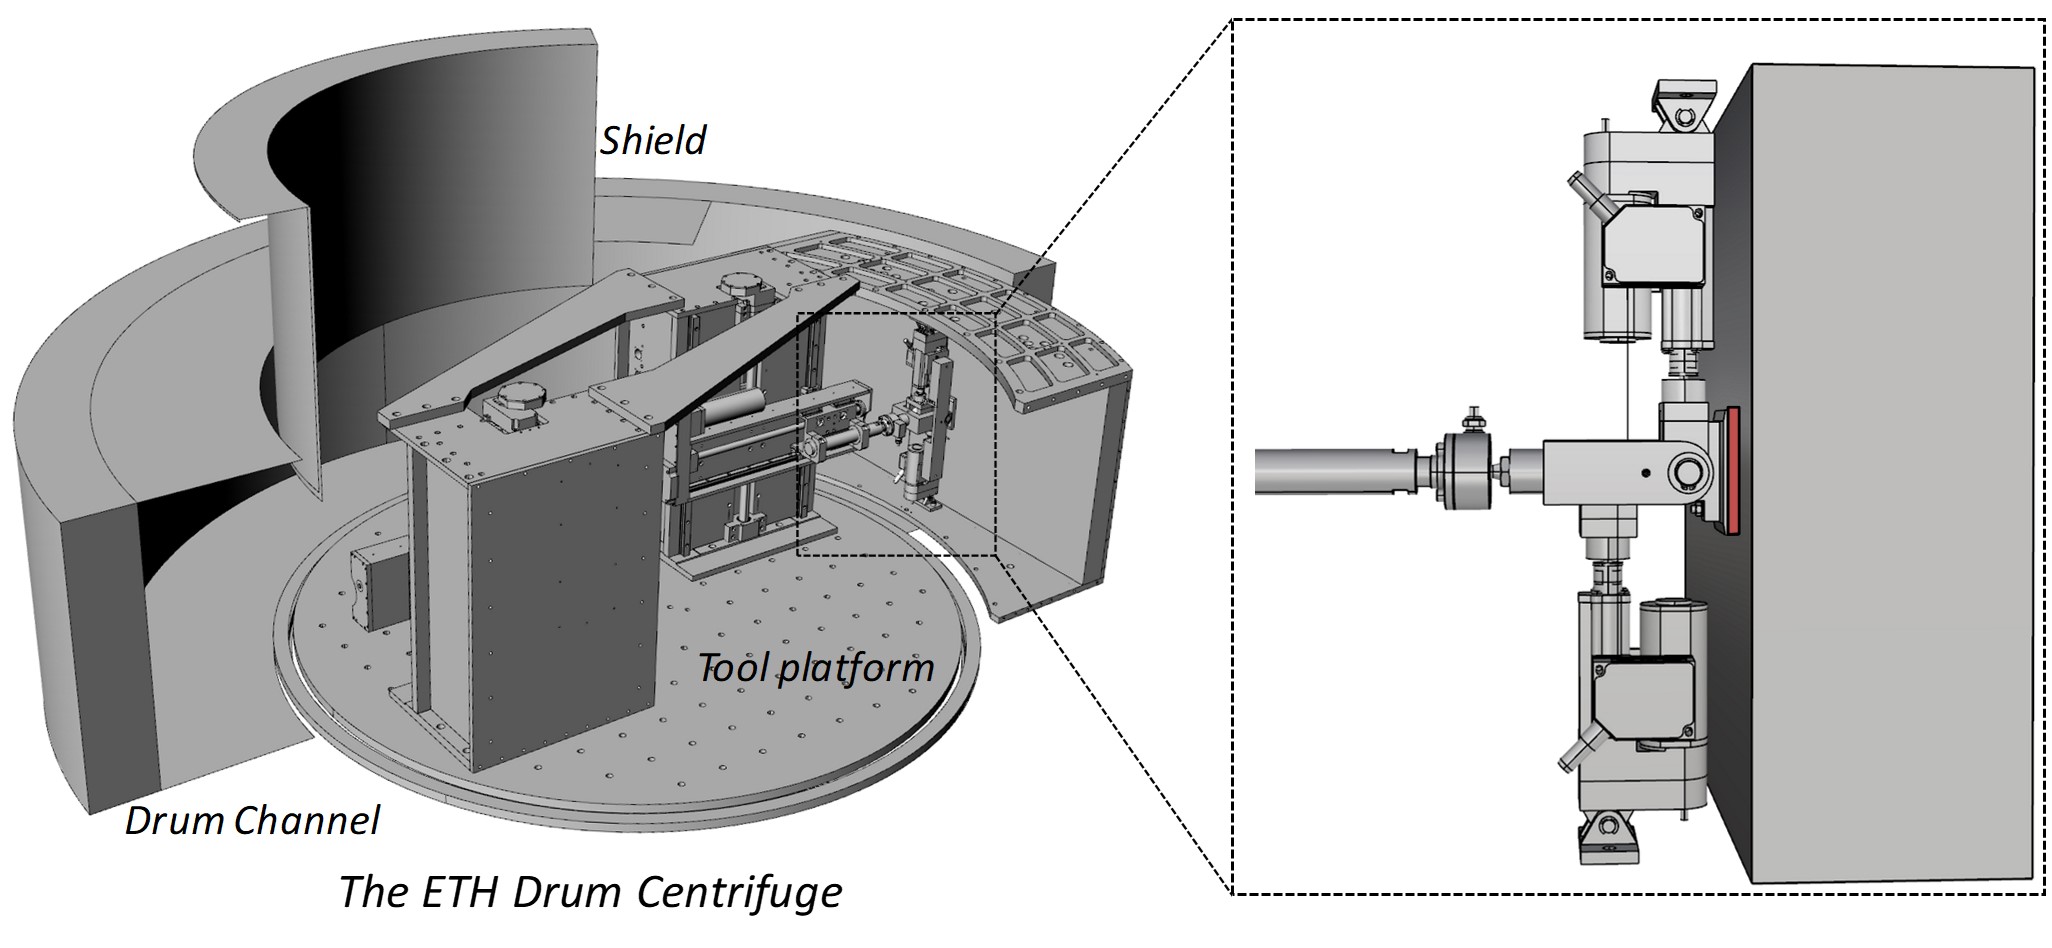 Schematic representation of the drum centrifuge with the VHM loading apparatus.